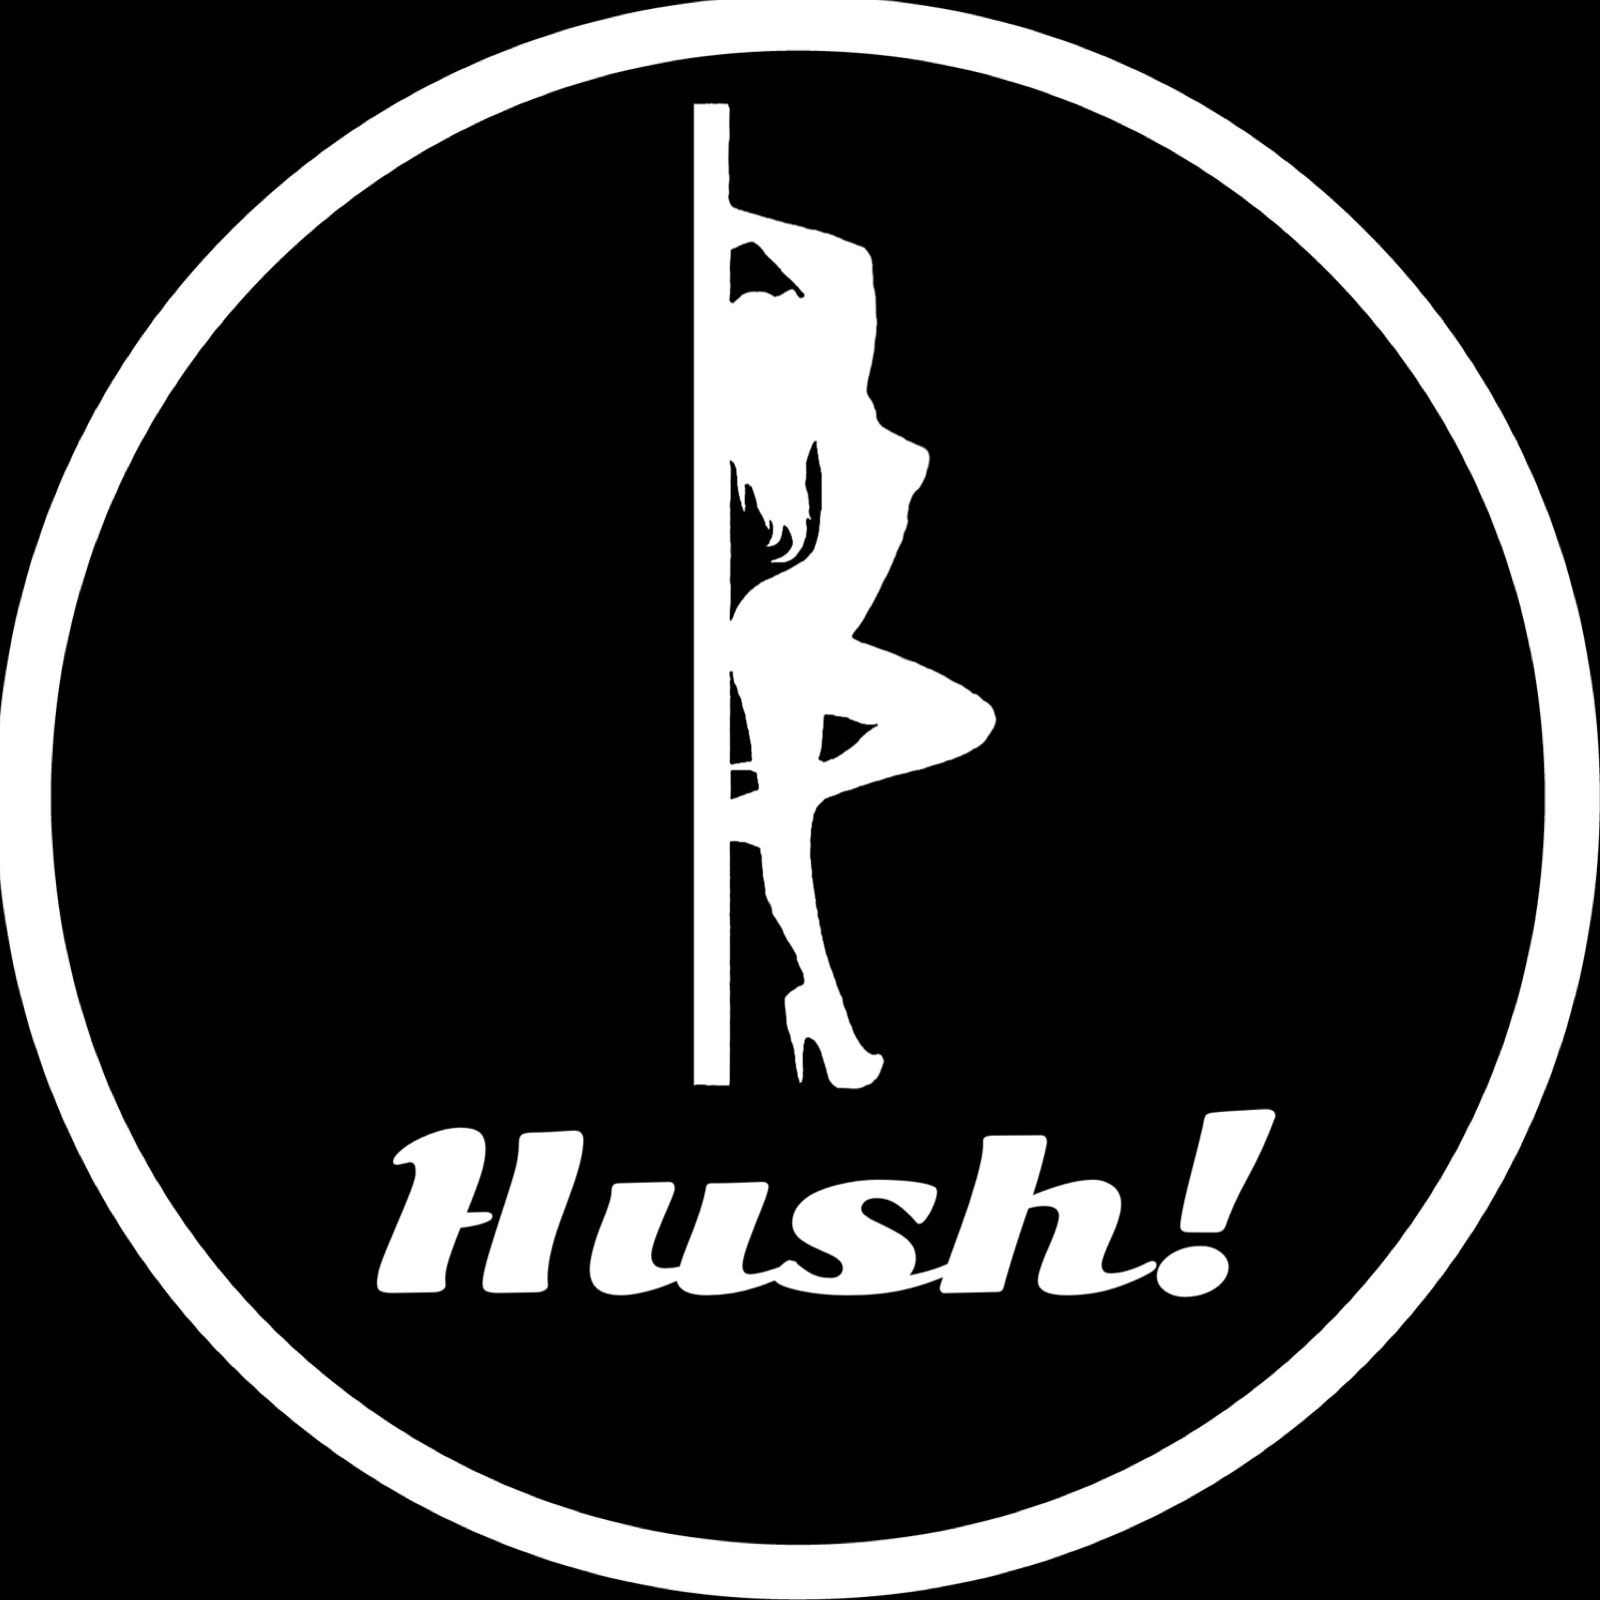 Hush! - Hush! Vol. 64- One on One with Dee Siren